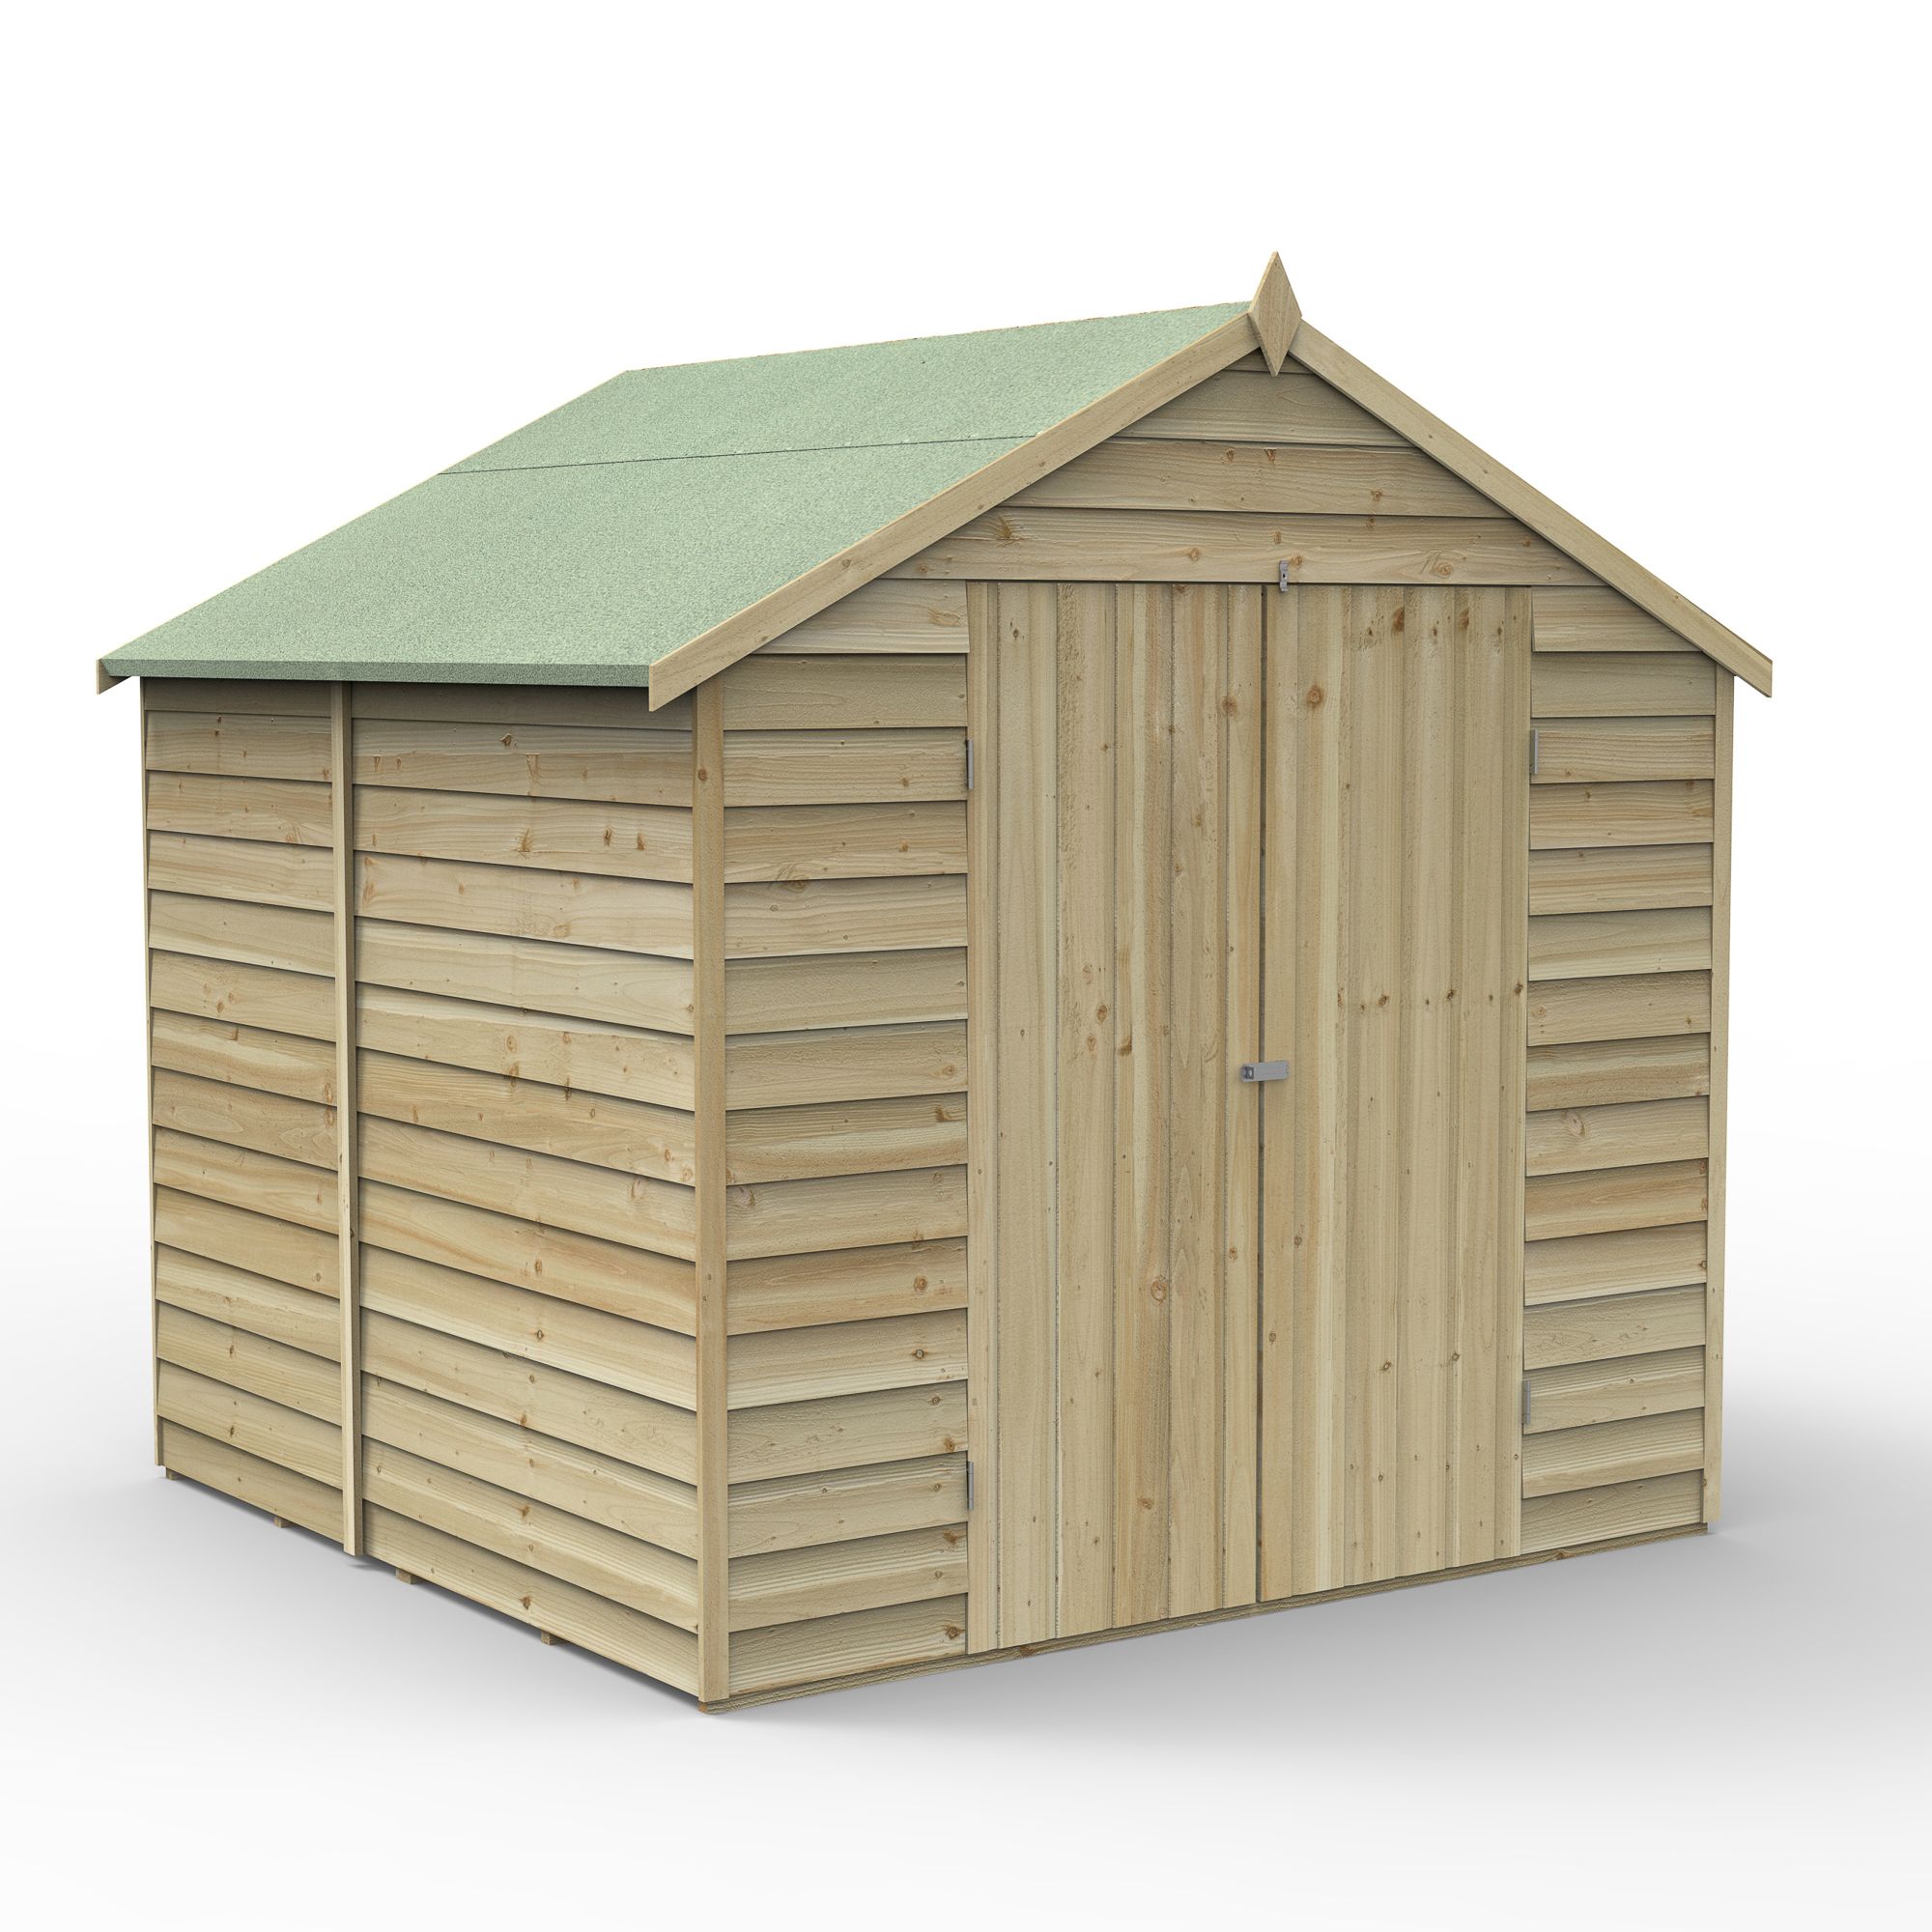 Forest Garden Overlap 7x7 ft Apex Wooden 2 door Shed with floor - Assembly service included